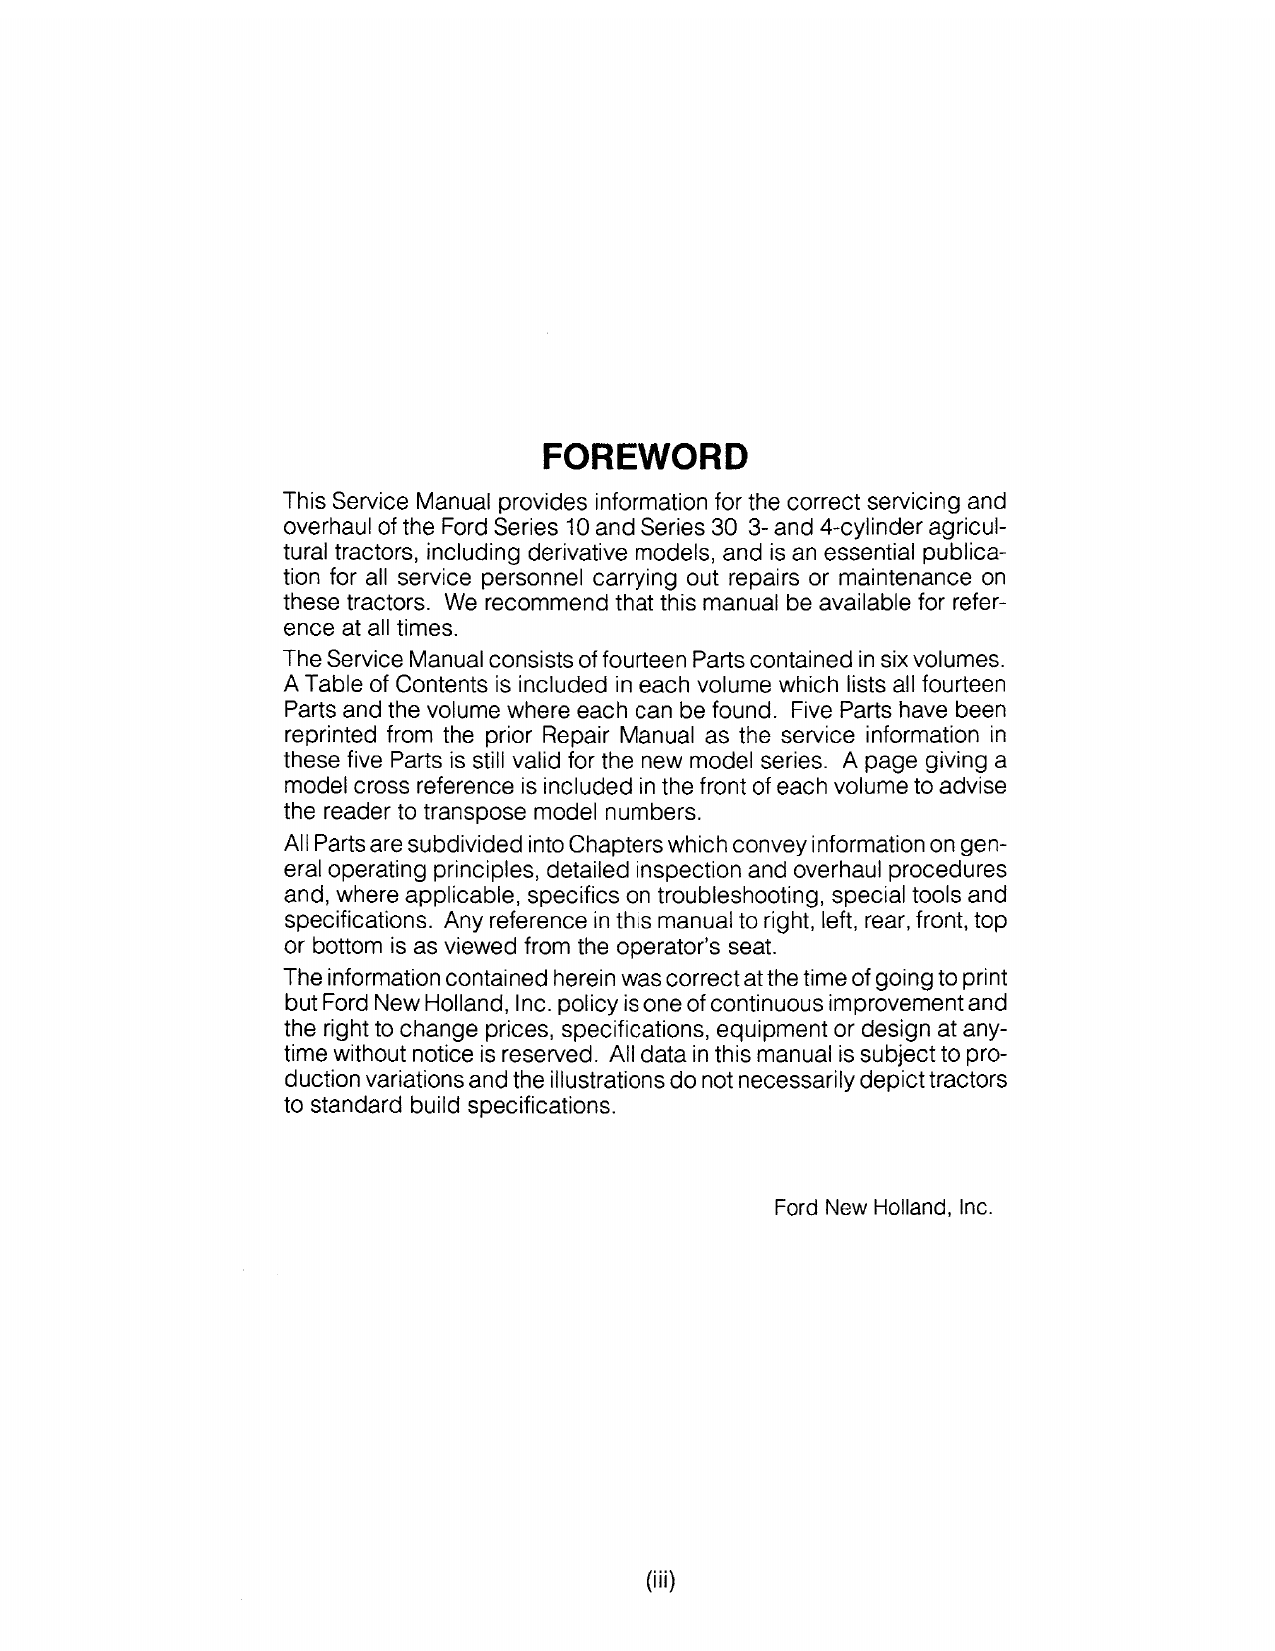 1985-1991 New Holland 8210 row-crop tractor service manual Preview image 4